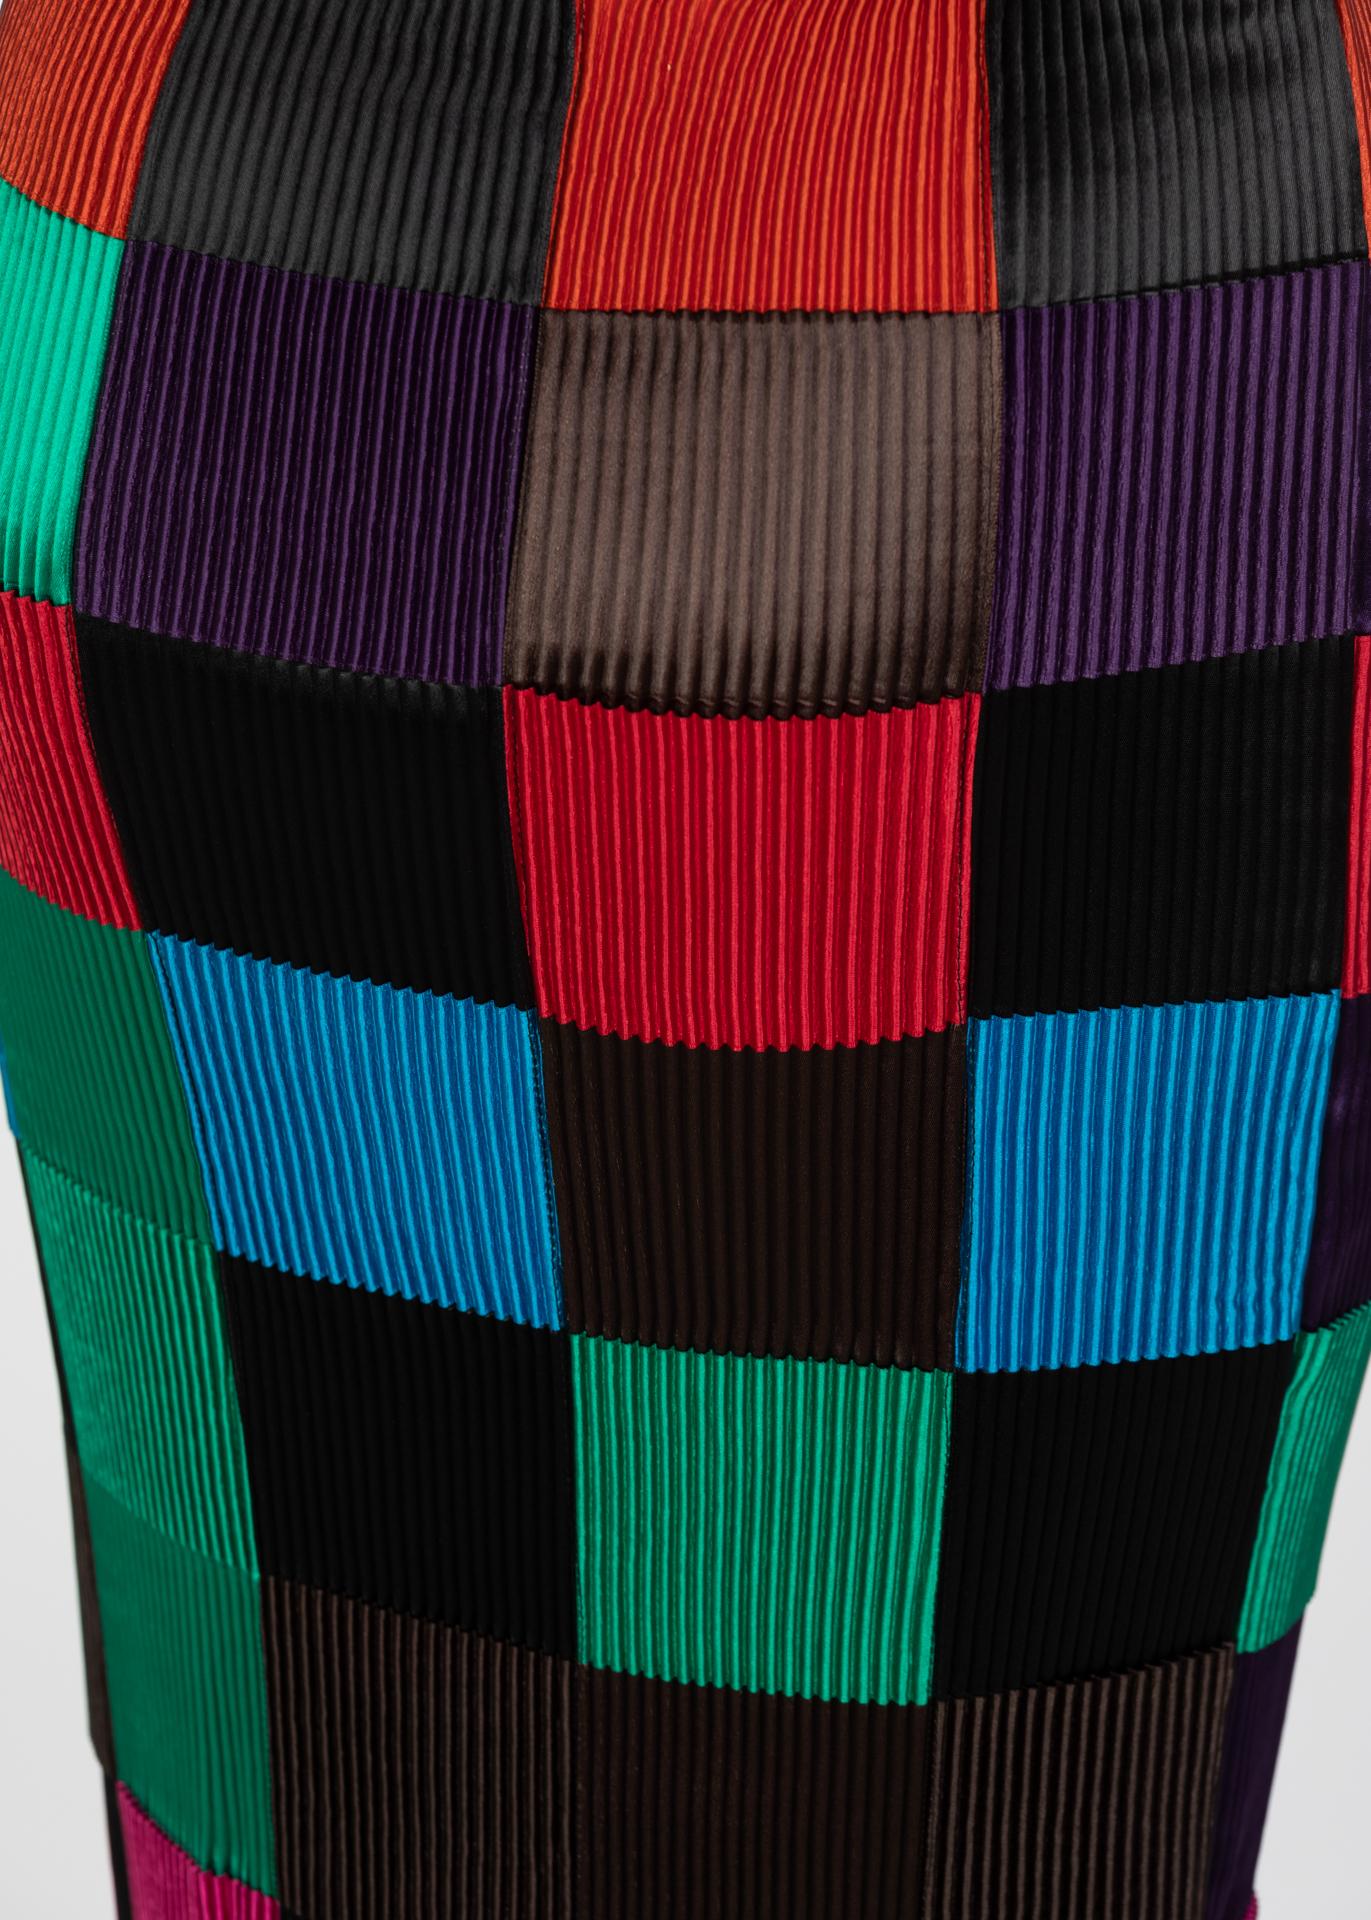 Black Issey Miyake Colorblock Woven Ribbon Skirt, 1990s For Sale